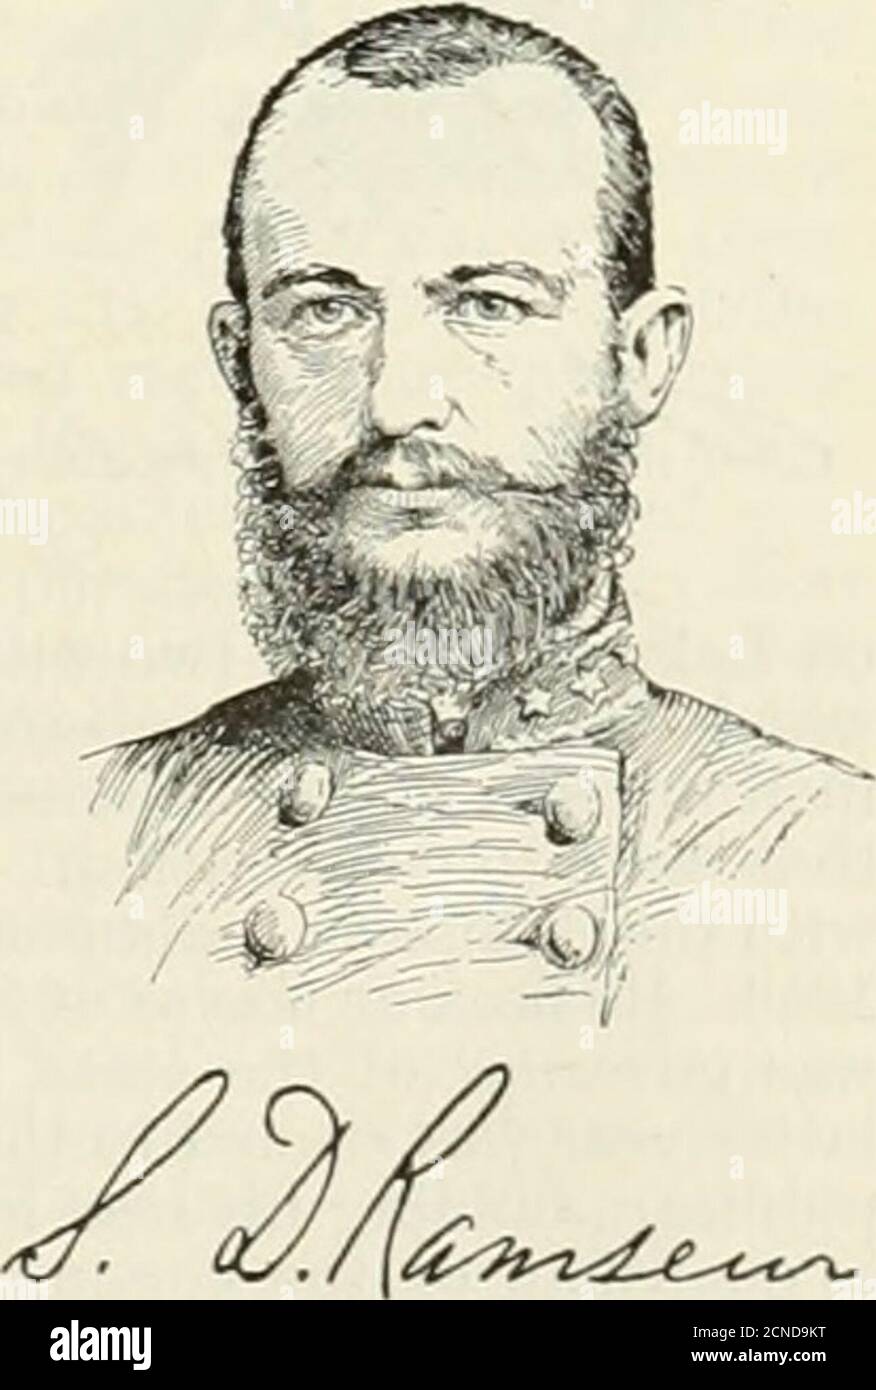 . Appleton's cyclopaedia of American biography . te service as captainof the light artillery.Late in 1861 he pro-ceeded to Virginiaand was stationed onthe south side of theJames, and in thespring of 1862 he wasordered to reportwith his battery toGen. John B. Magru-der. During Gen.Mdlellans advance up the peninsula he had command of the artil-lery of the right wing with the rank of major.Soon afterward he was promoted colonel, assignedto the 49th North Carolina infantry, and withthis regiment participated in the latter part ofthe peninsular campaign. He received the ap-pointment of brigadier-ge Stock Photo